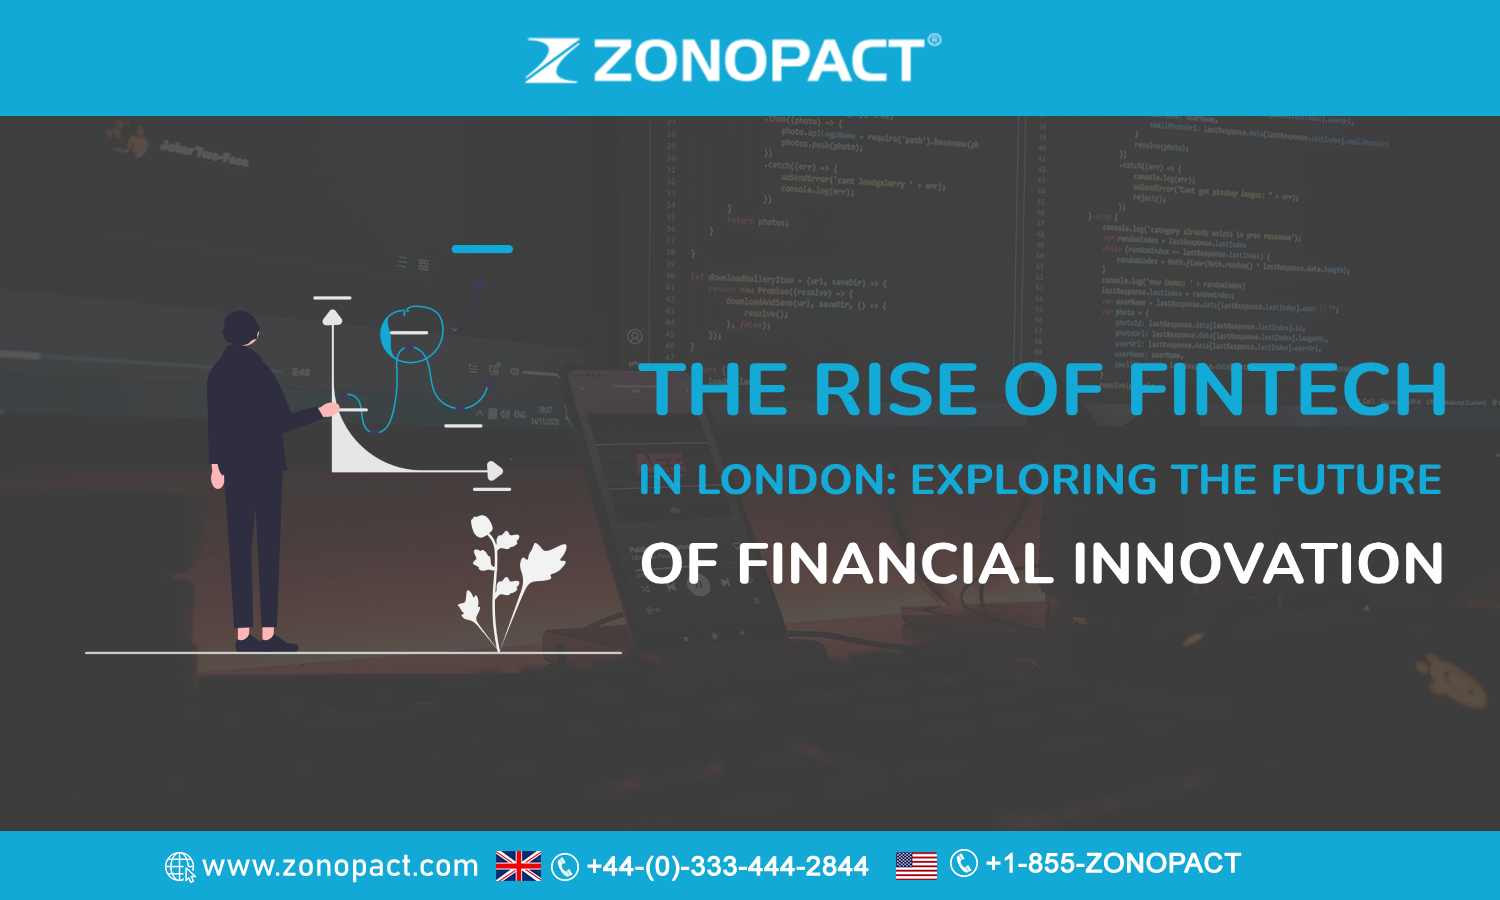 The Rise of FinTech in London Exploring the Future of Financial Innovation